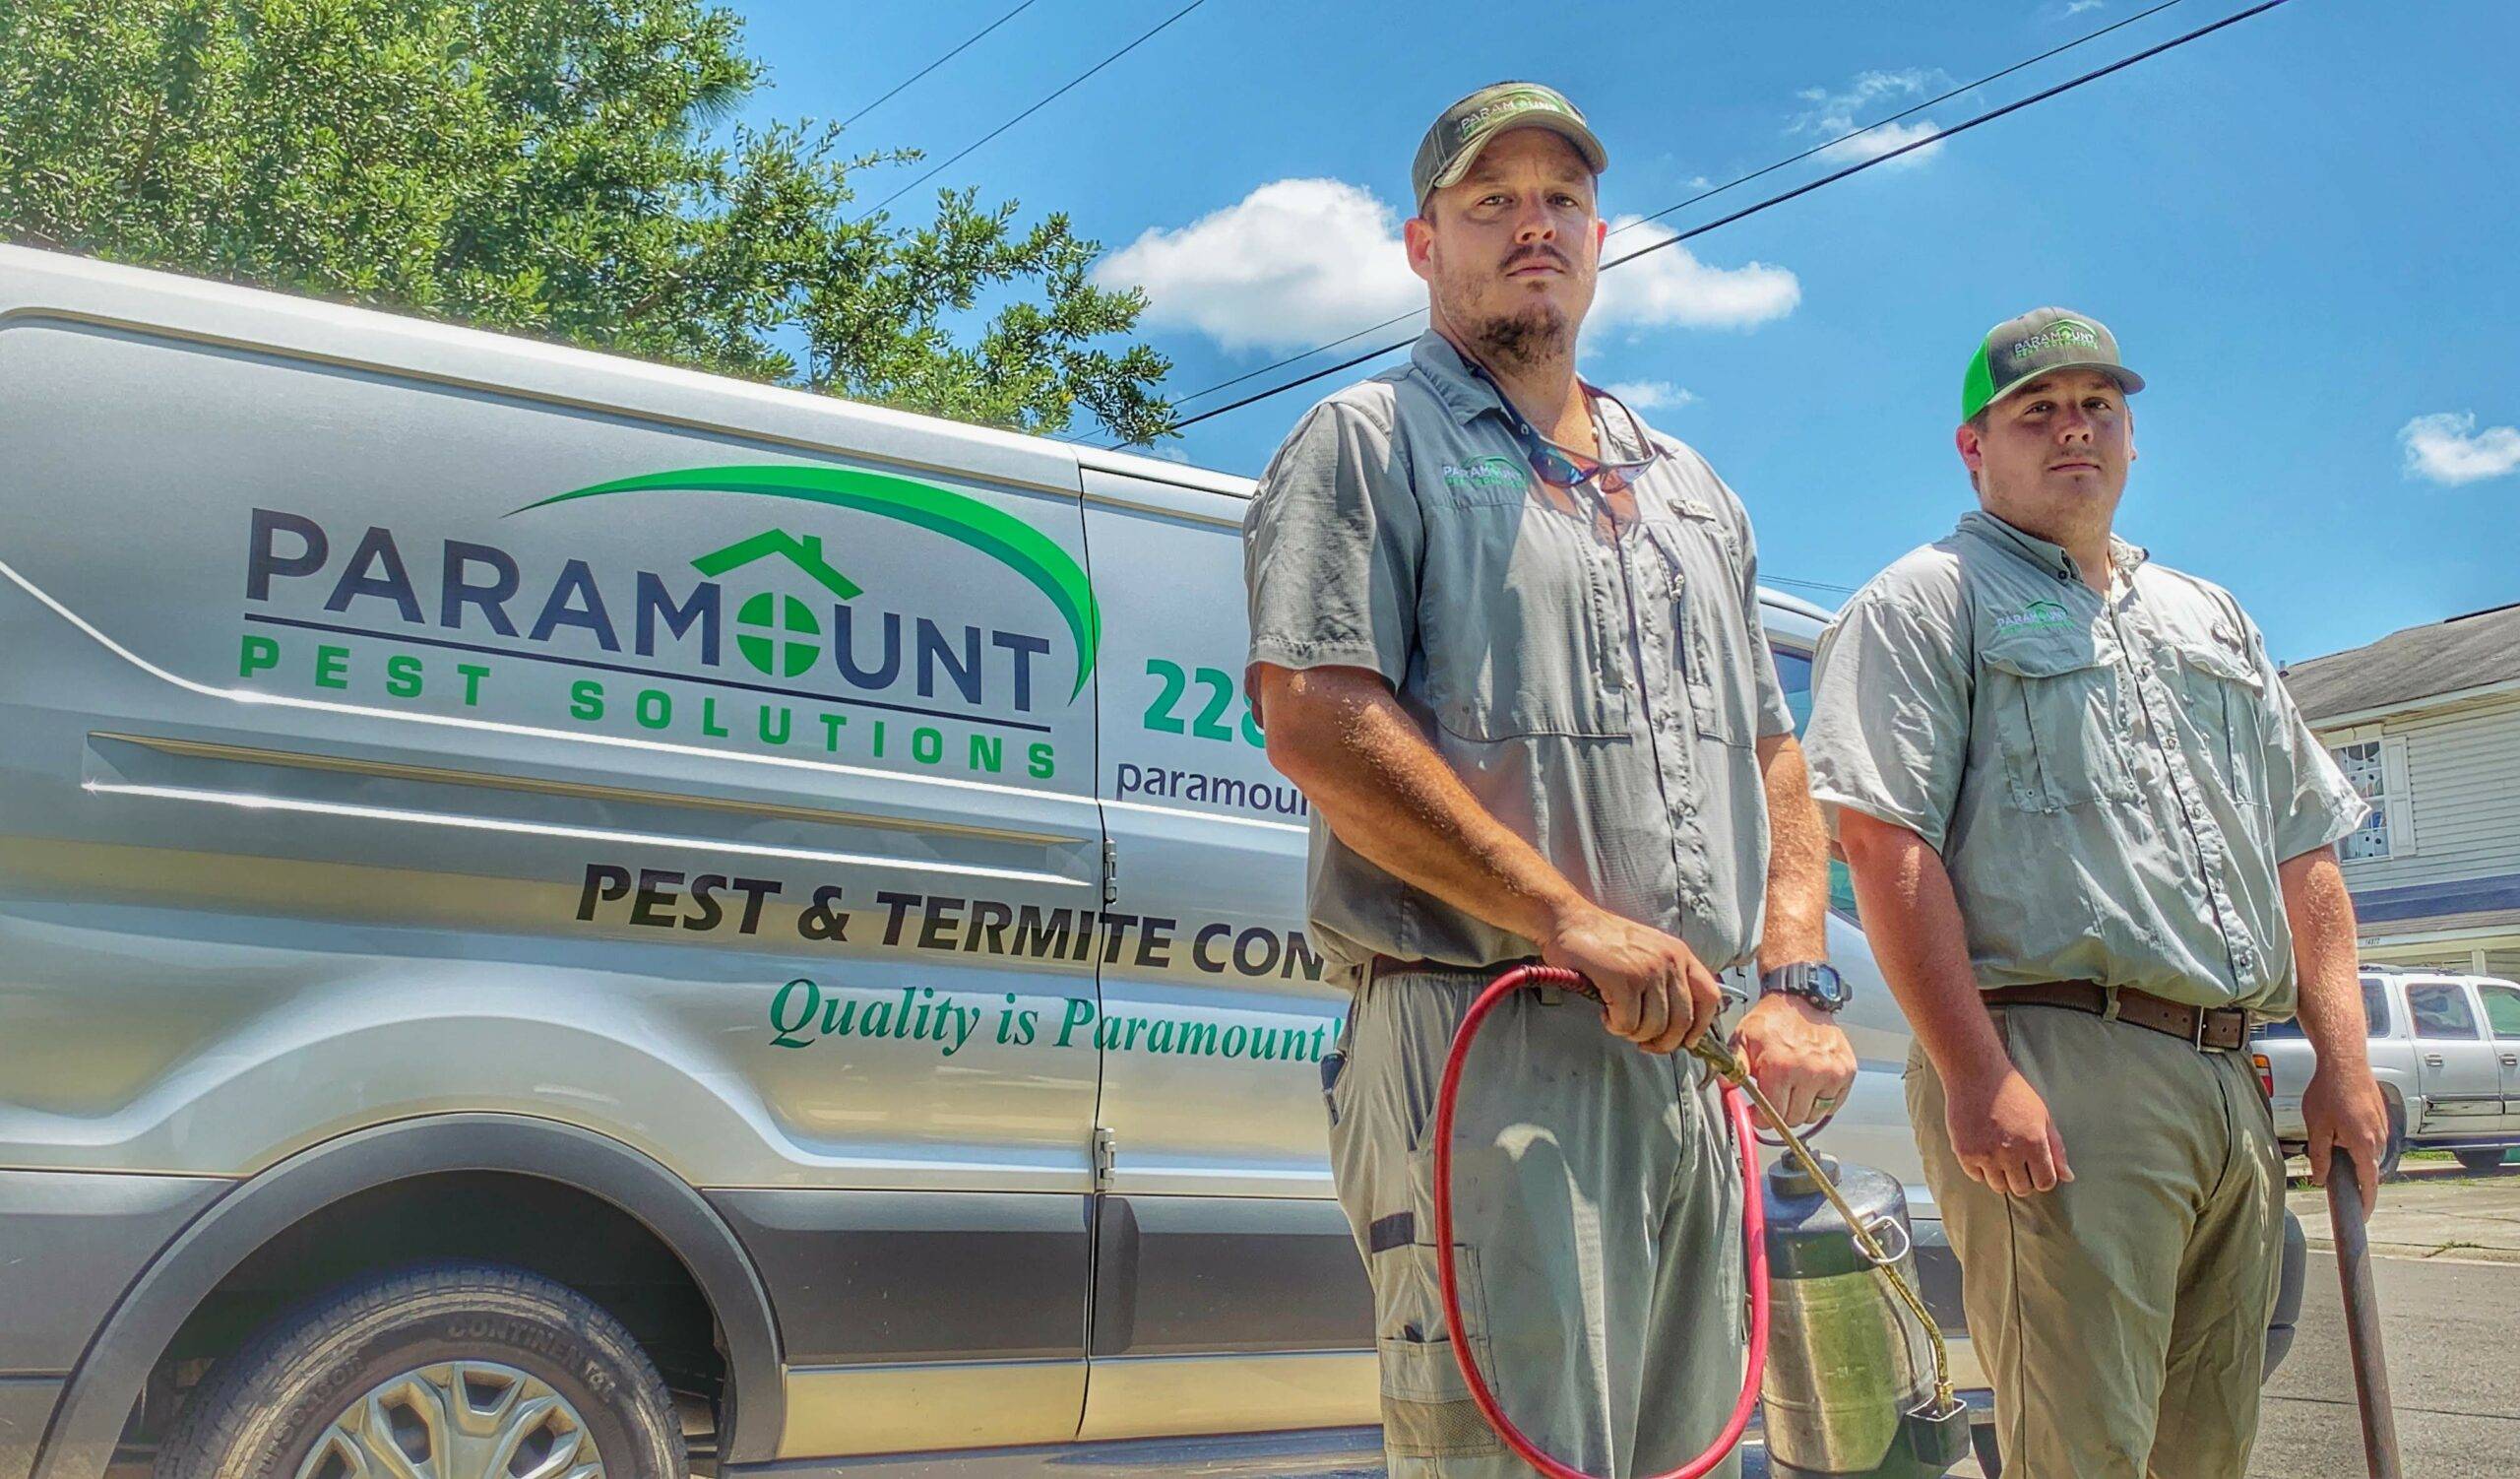 Let Paramount Pest Solutions get rid of your rodent problems!